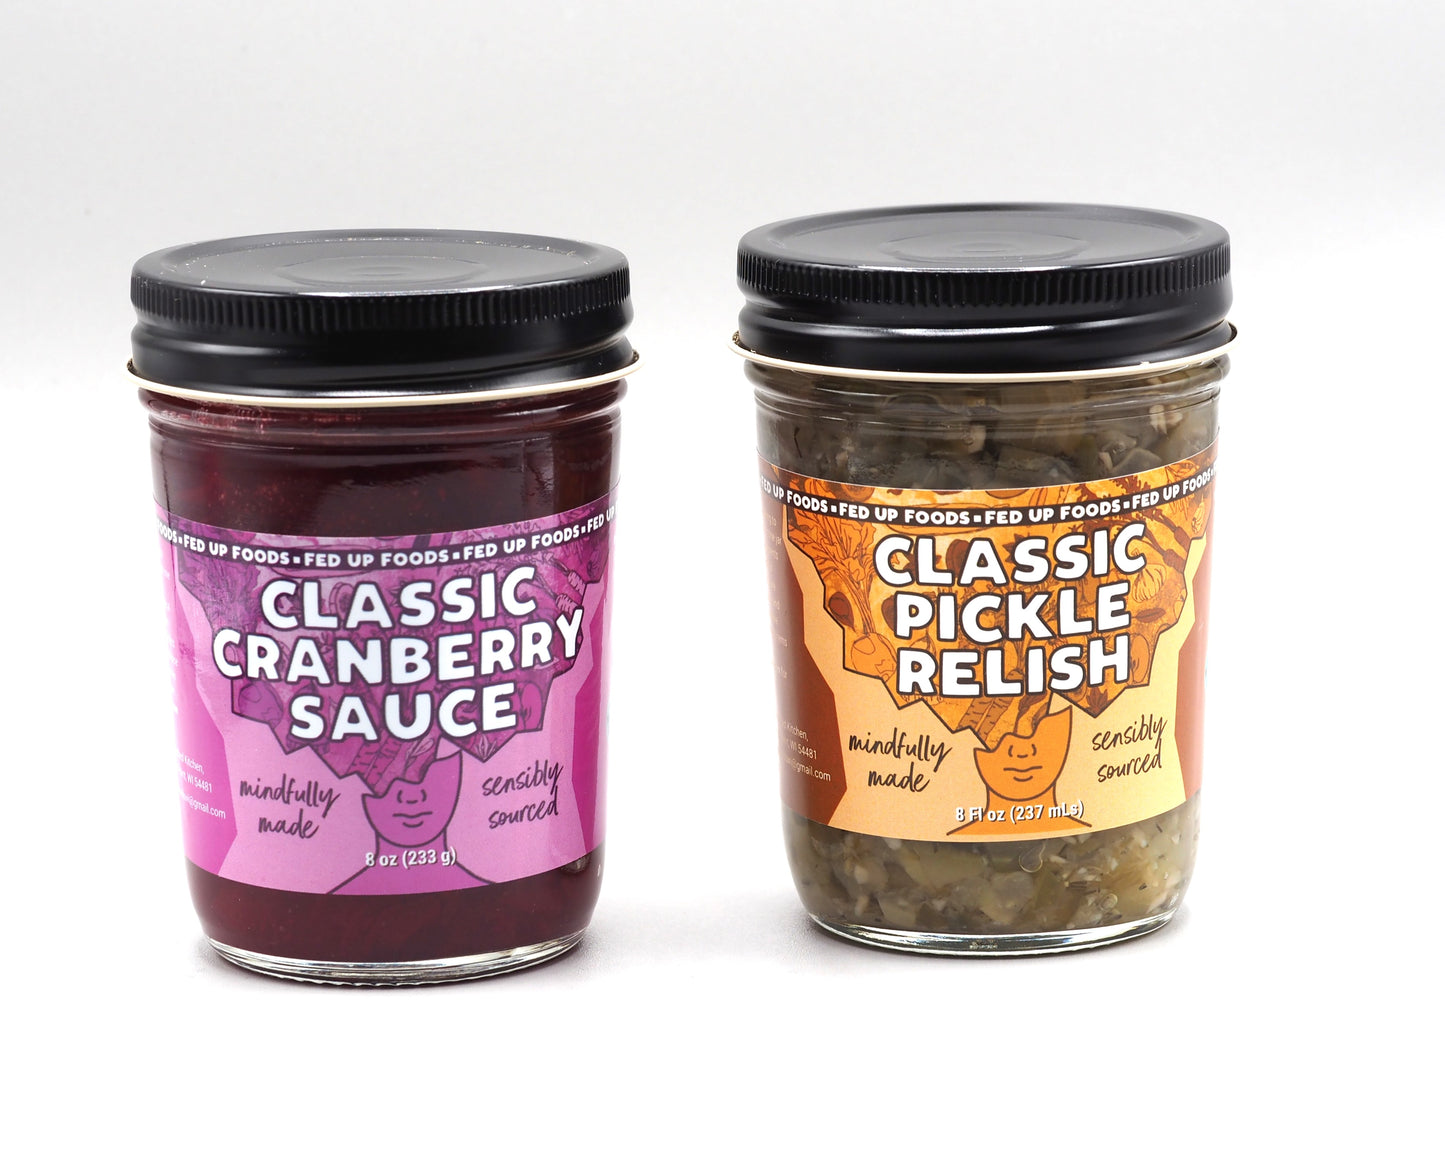 Fed Up Foods variety pack 2 pack 8 oz jars classic cranberry sauce dill pickle relish specialty cranberry sauce